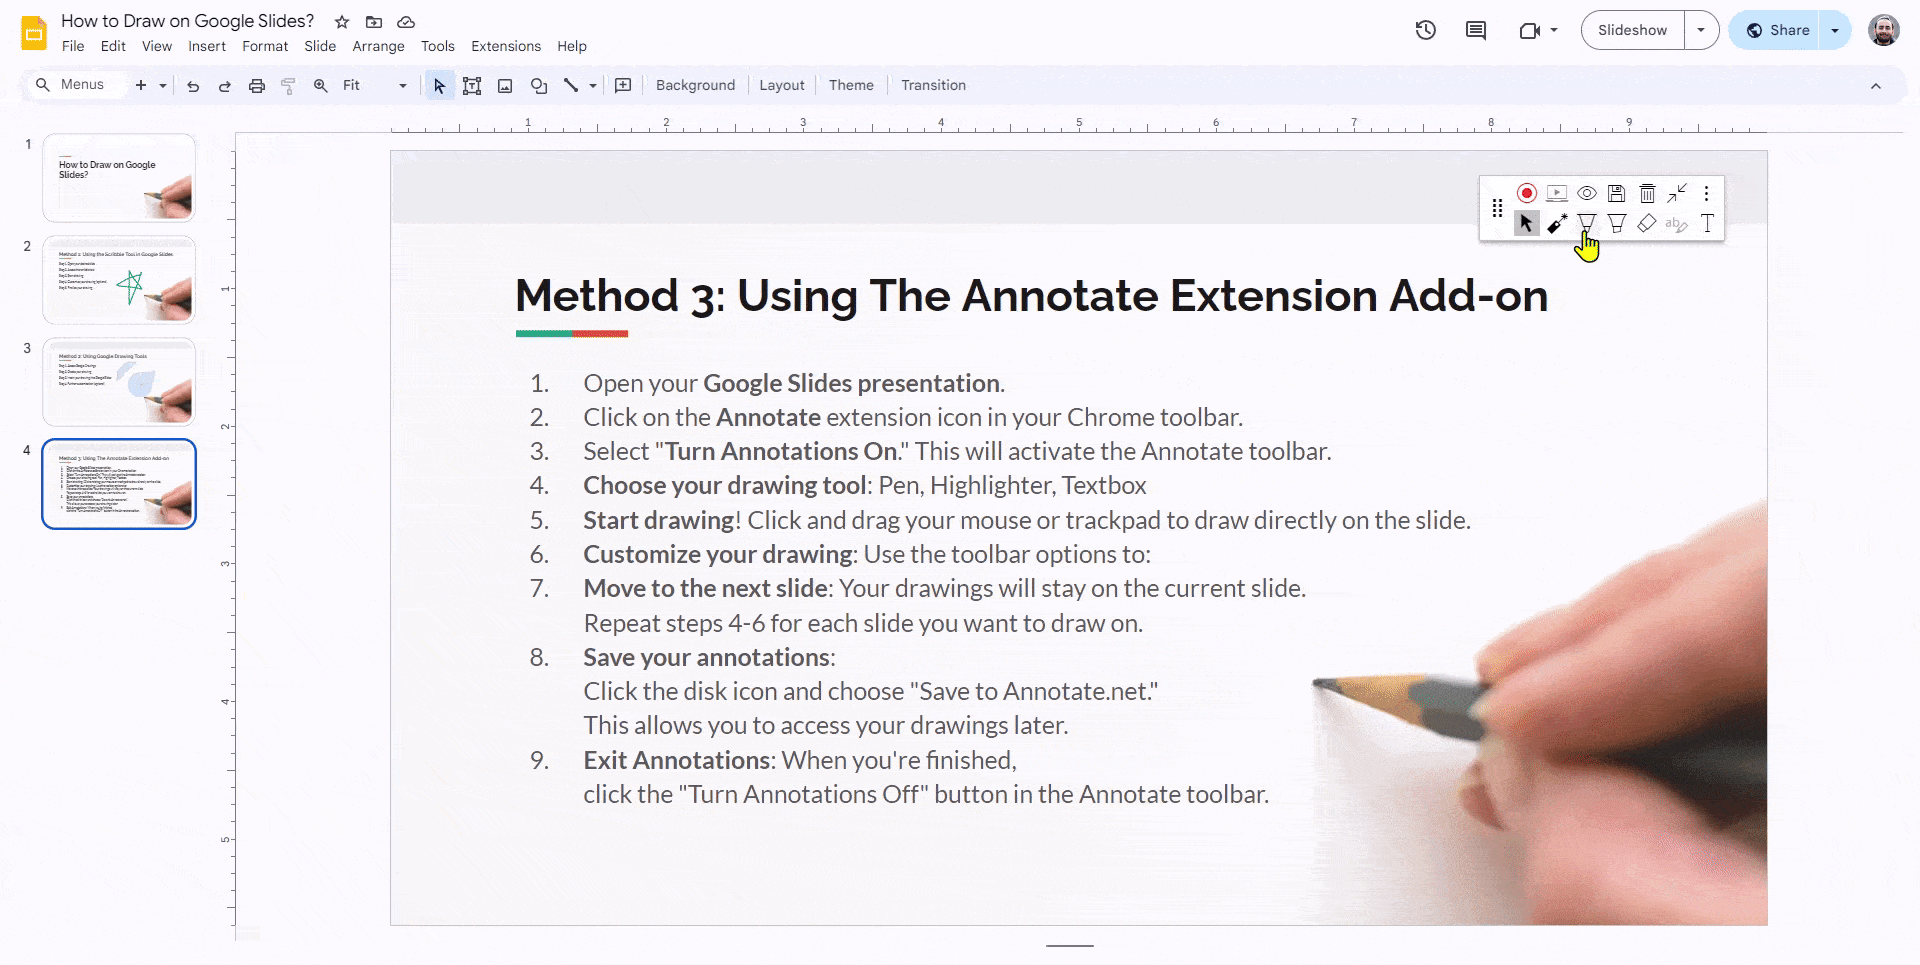 customize your drawing from annotate toolbar